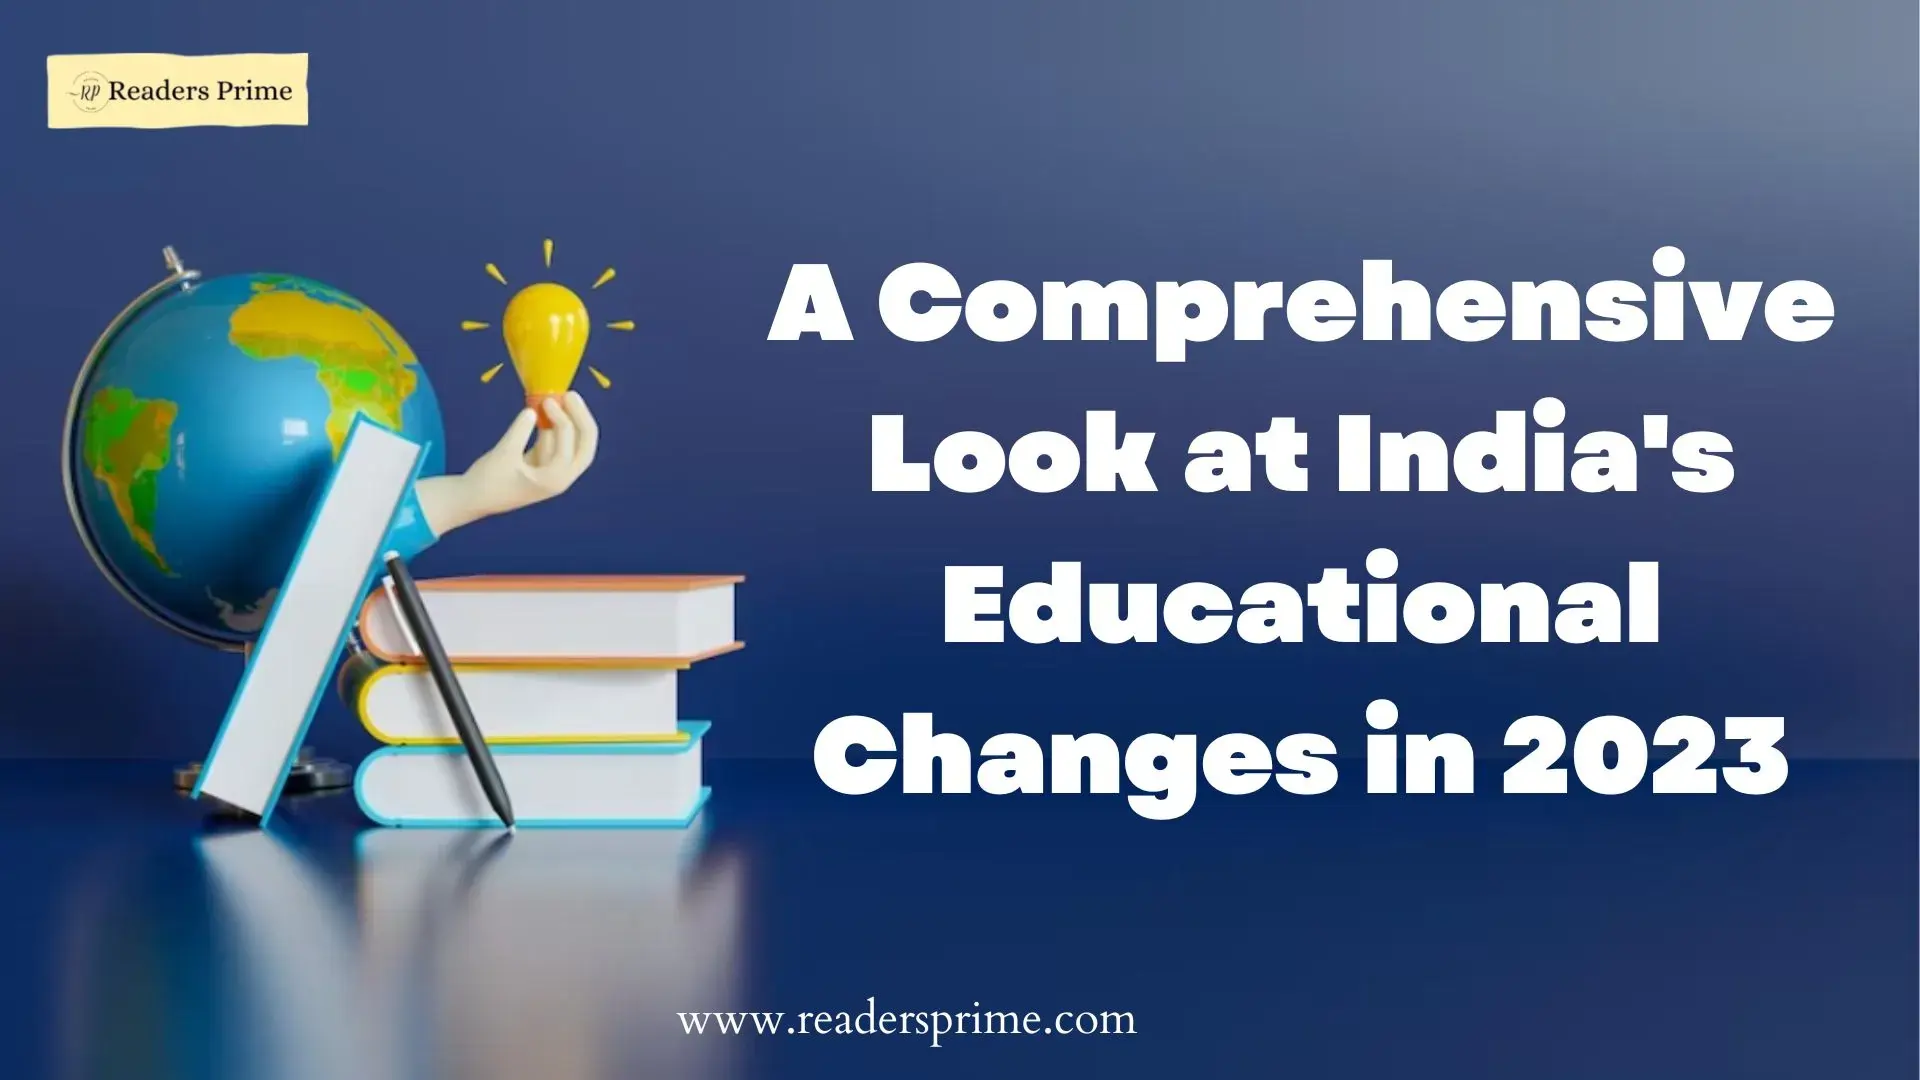 A Comprehensive Look at India’s Educational Changes in 2023